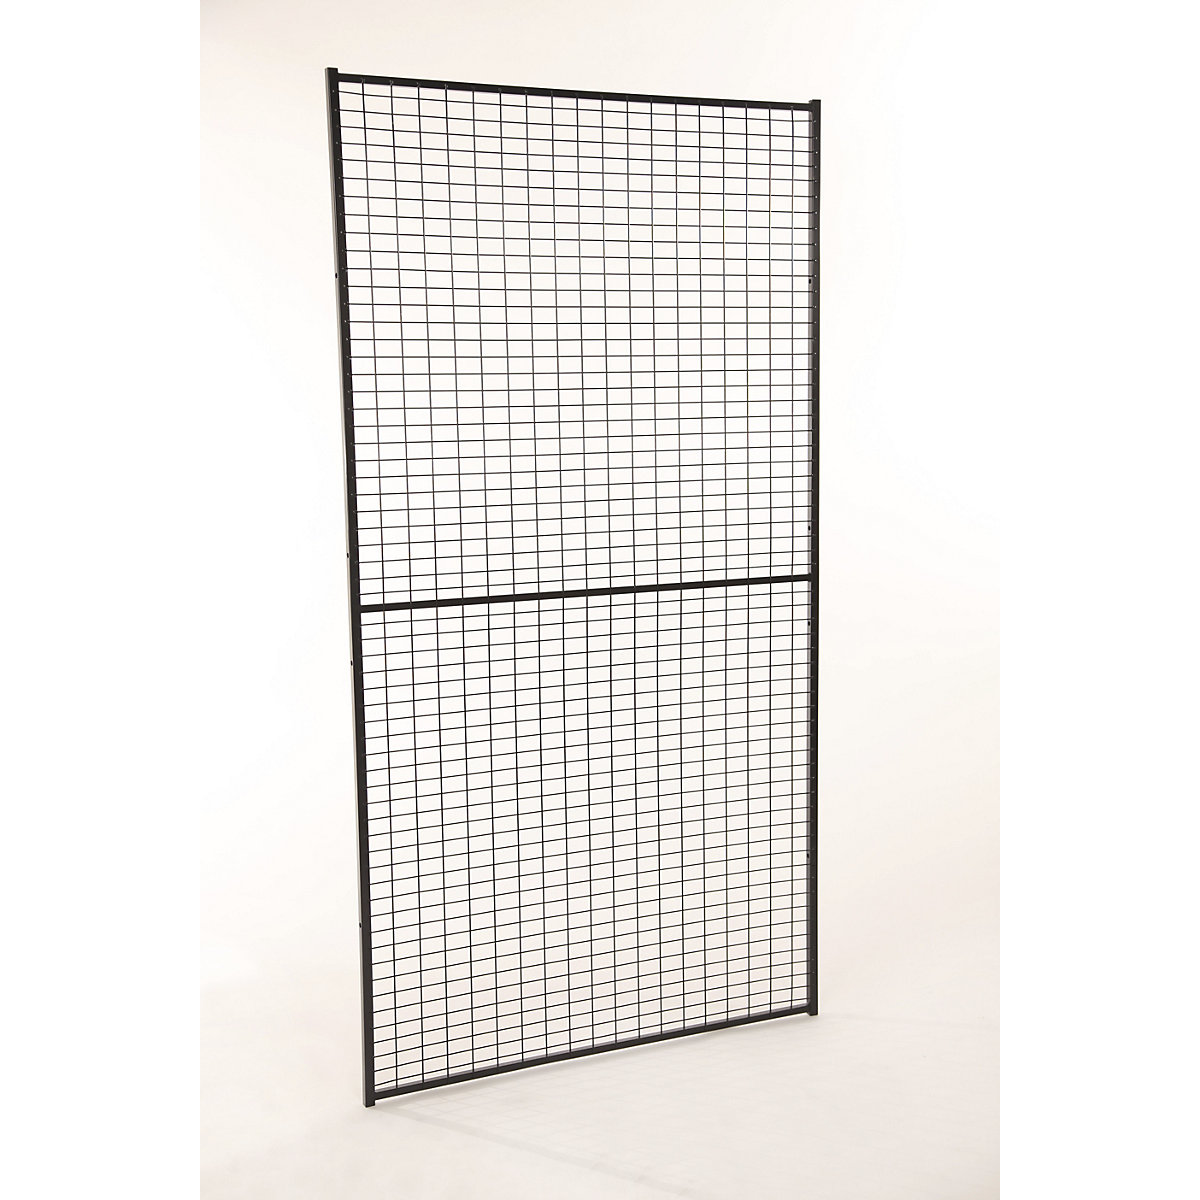 X-GUARD LITE machine protective fencing, wall section – Axelent, height 2200 mm, width 800 mm-15